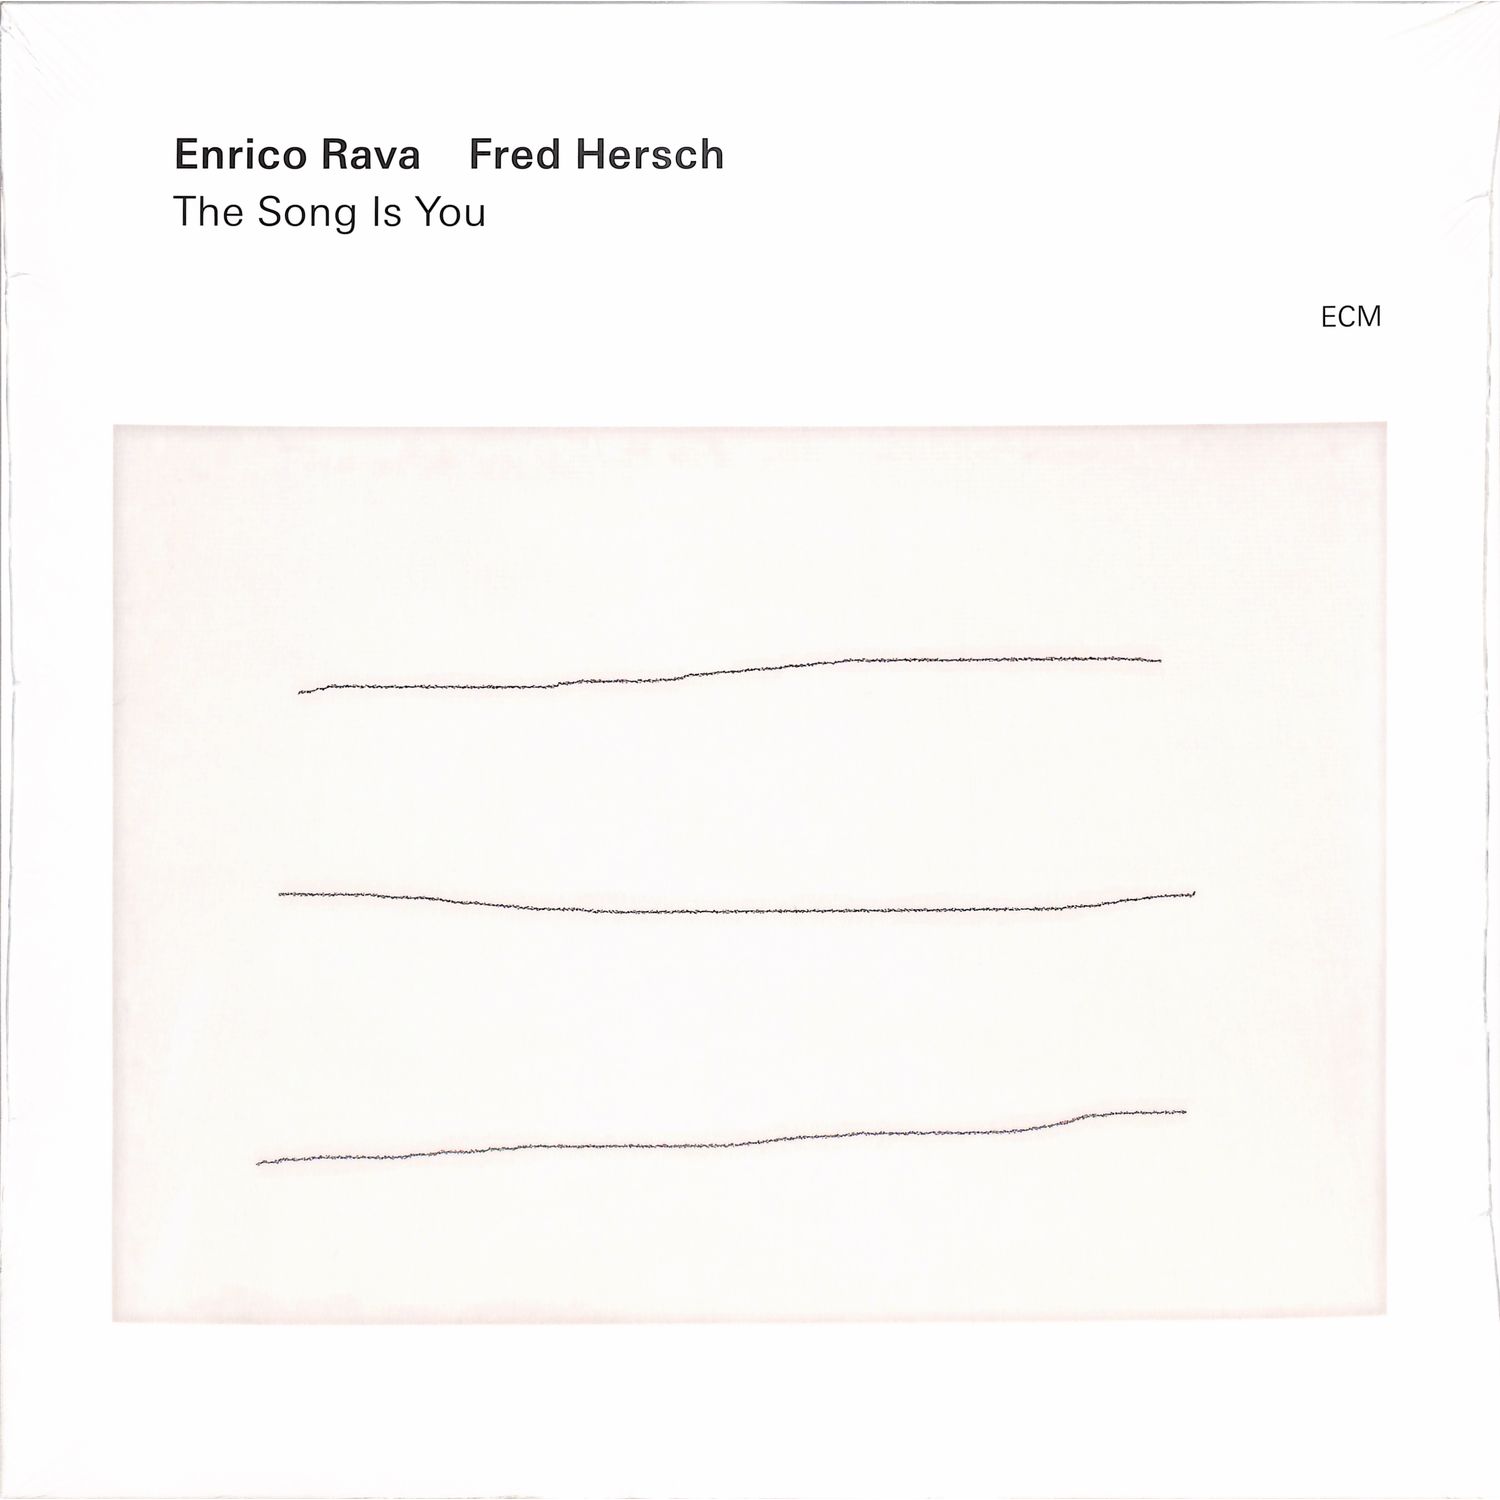 Enrico Rava / Fred Hersch - THE SONG IS YOU 